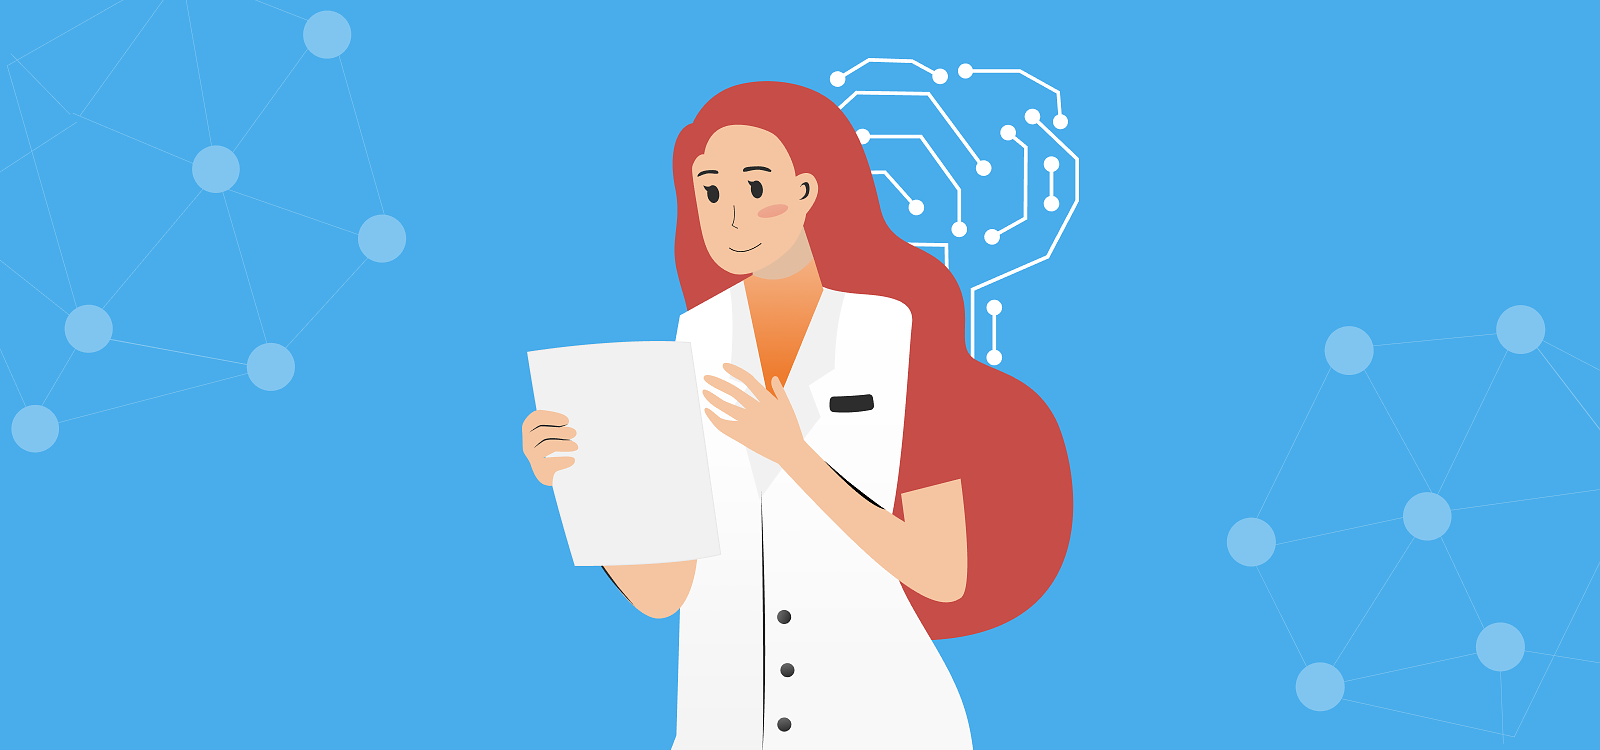 Will AI replace doctors?